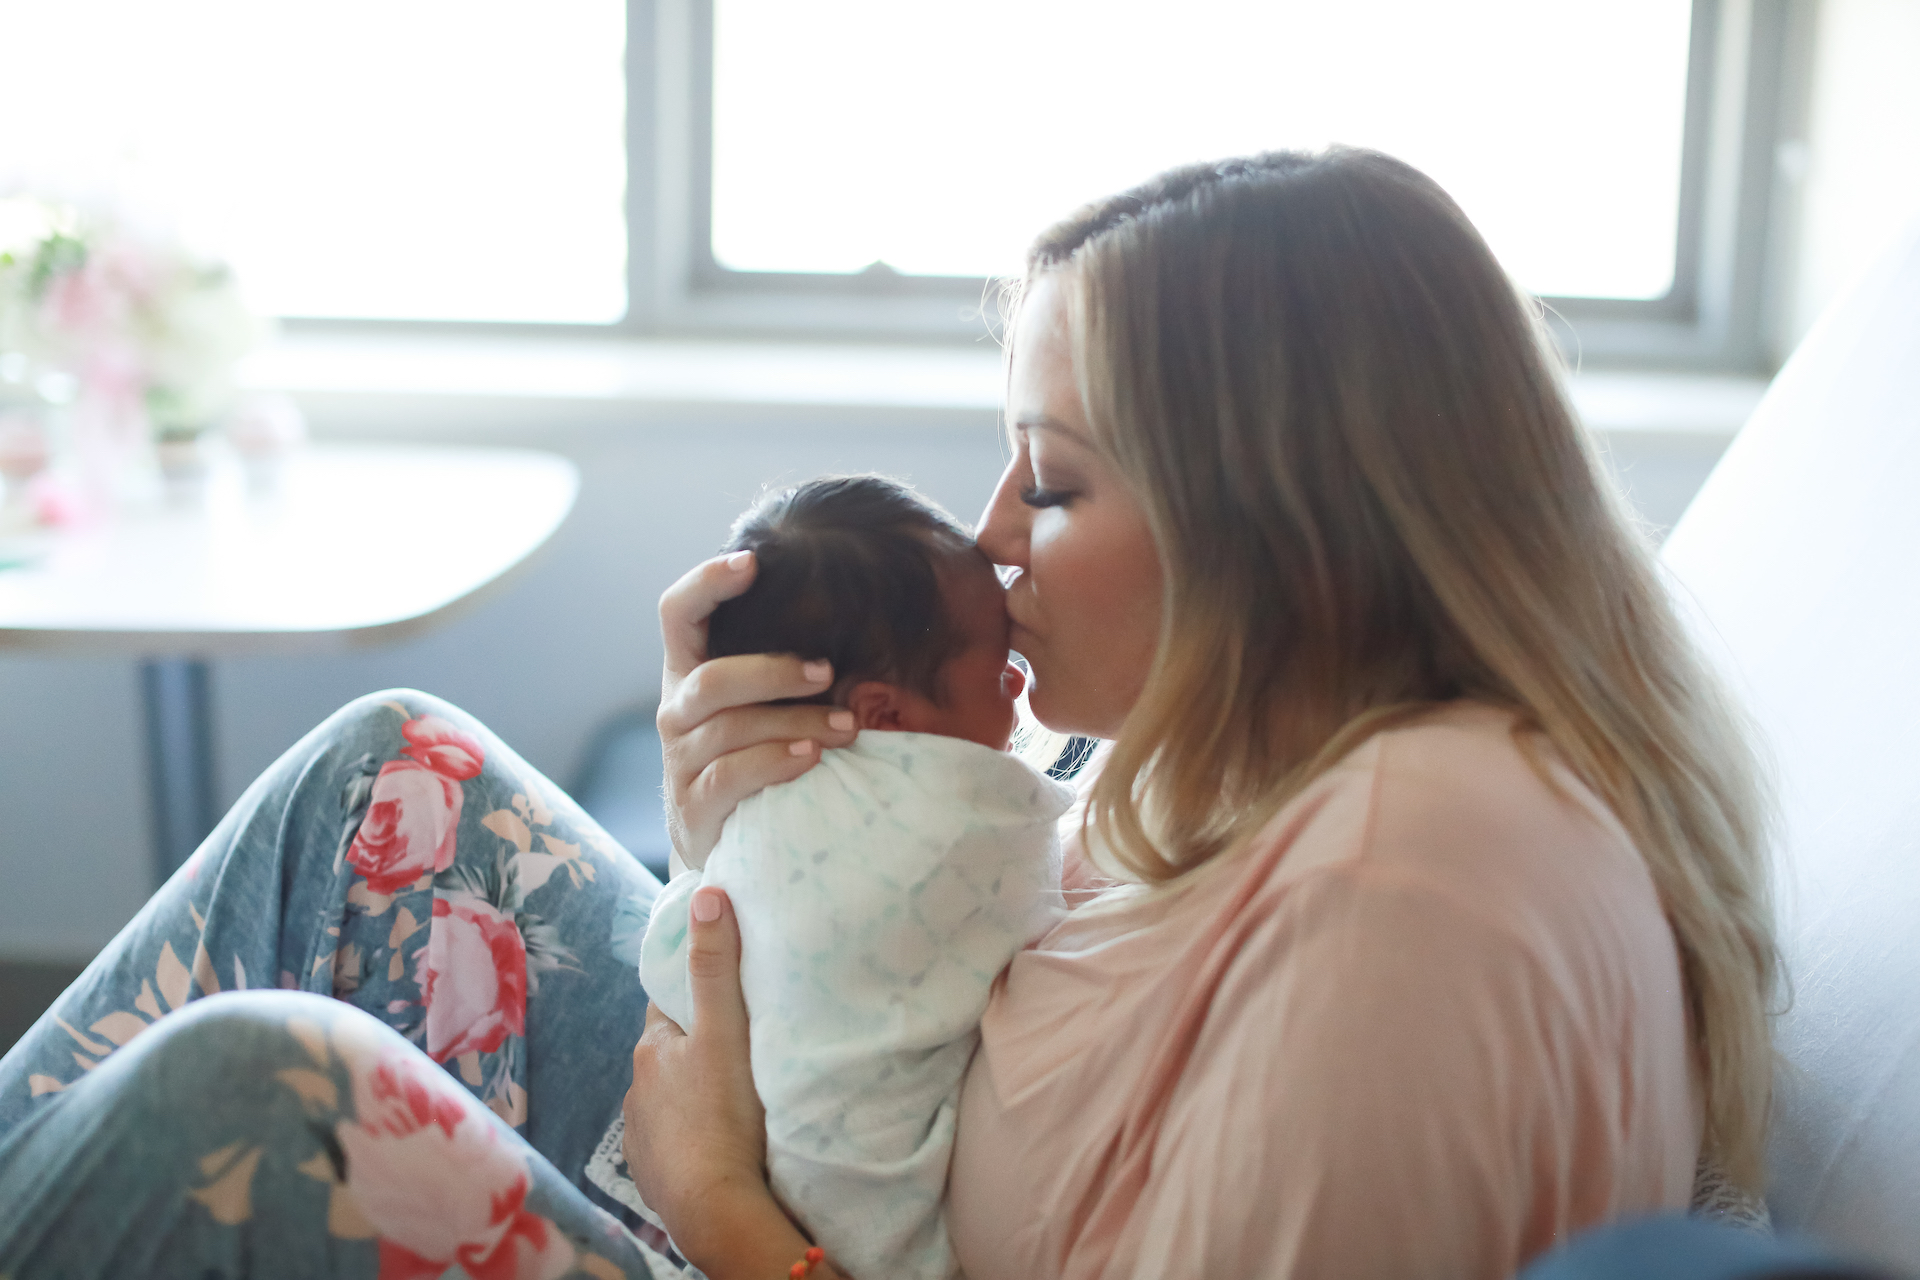 Victoria has had two children born via egg donation. In this blog, she shares her tips on coping with infertility and accepting using donor eggs.